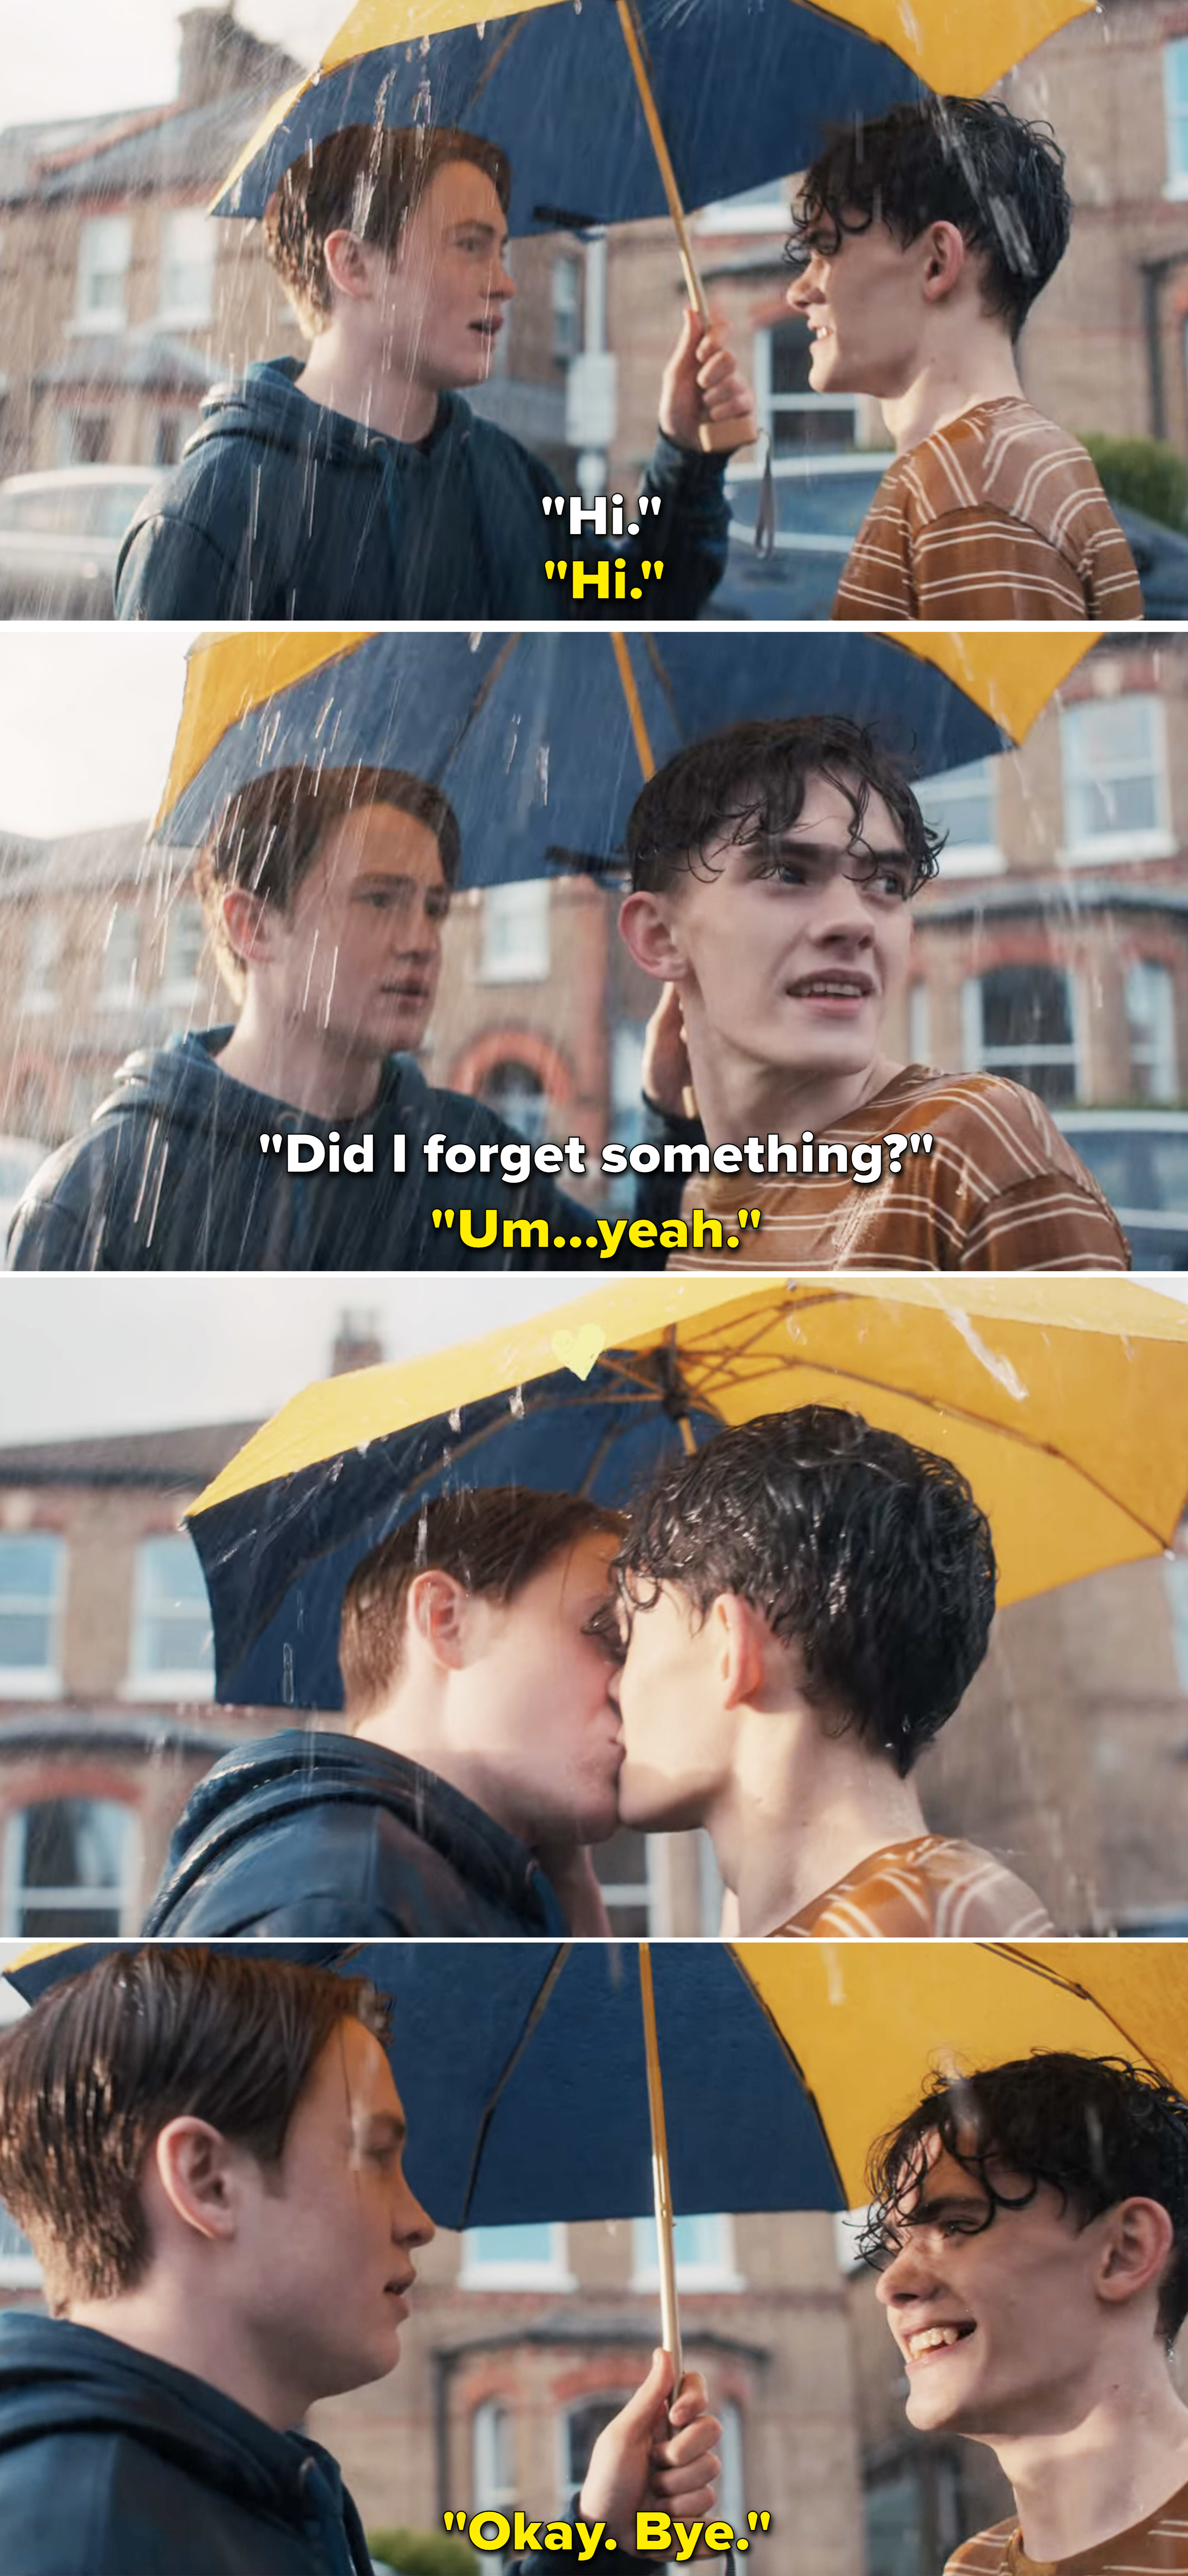 Nick and Charlie greeting each other, kissing each other in the rain, and saying goodbye